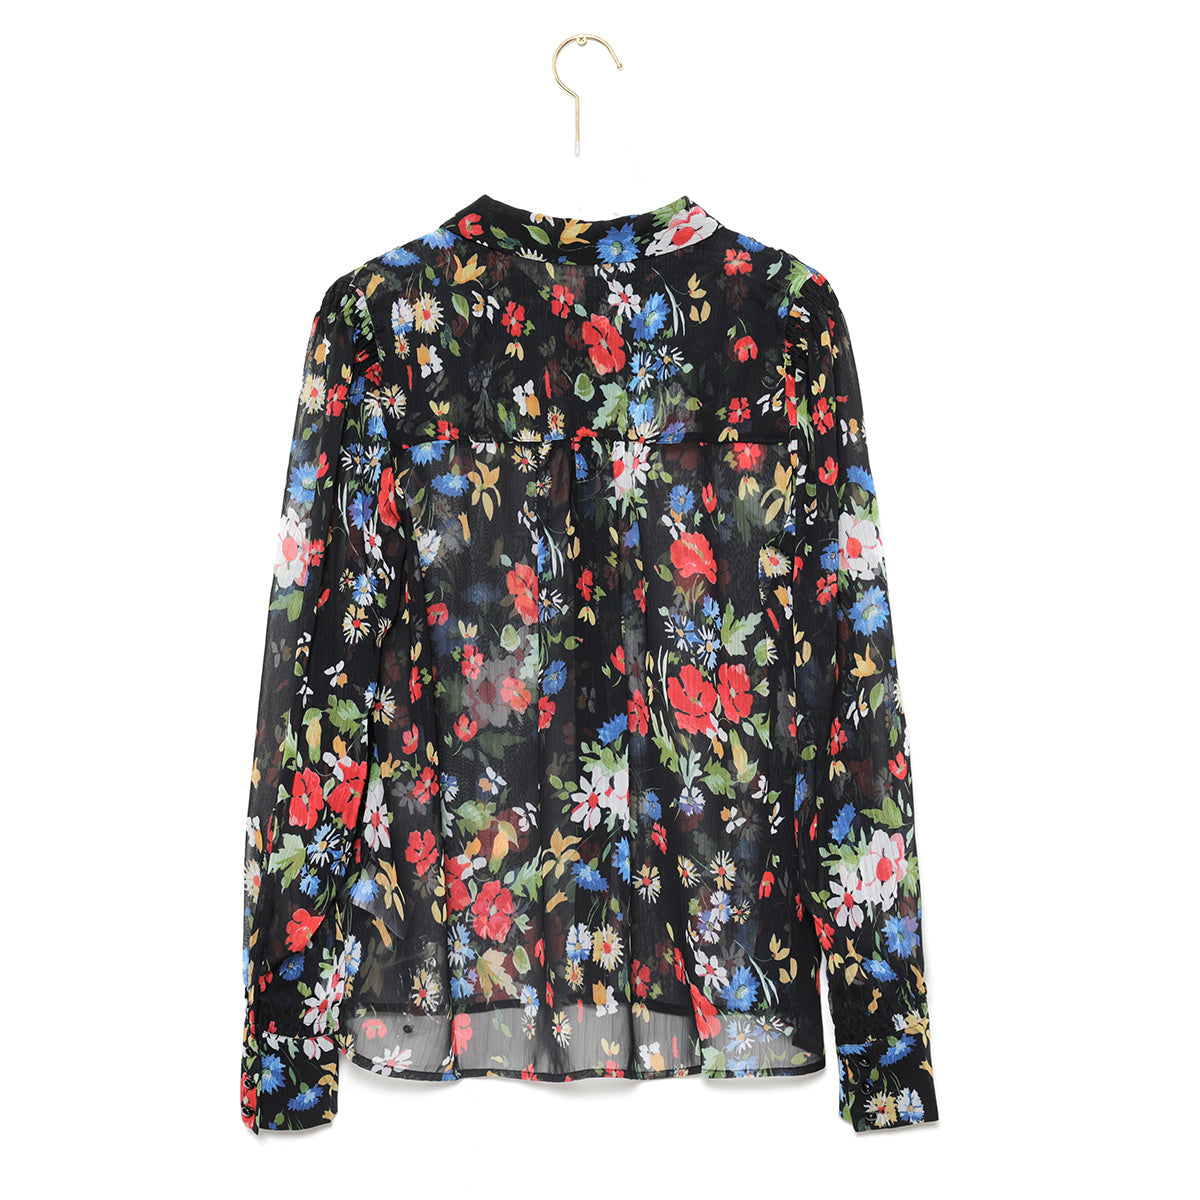 Garden to beach paradise: Transport yourself to paradise with a colorful floral beach shirt.